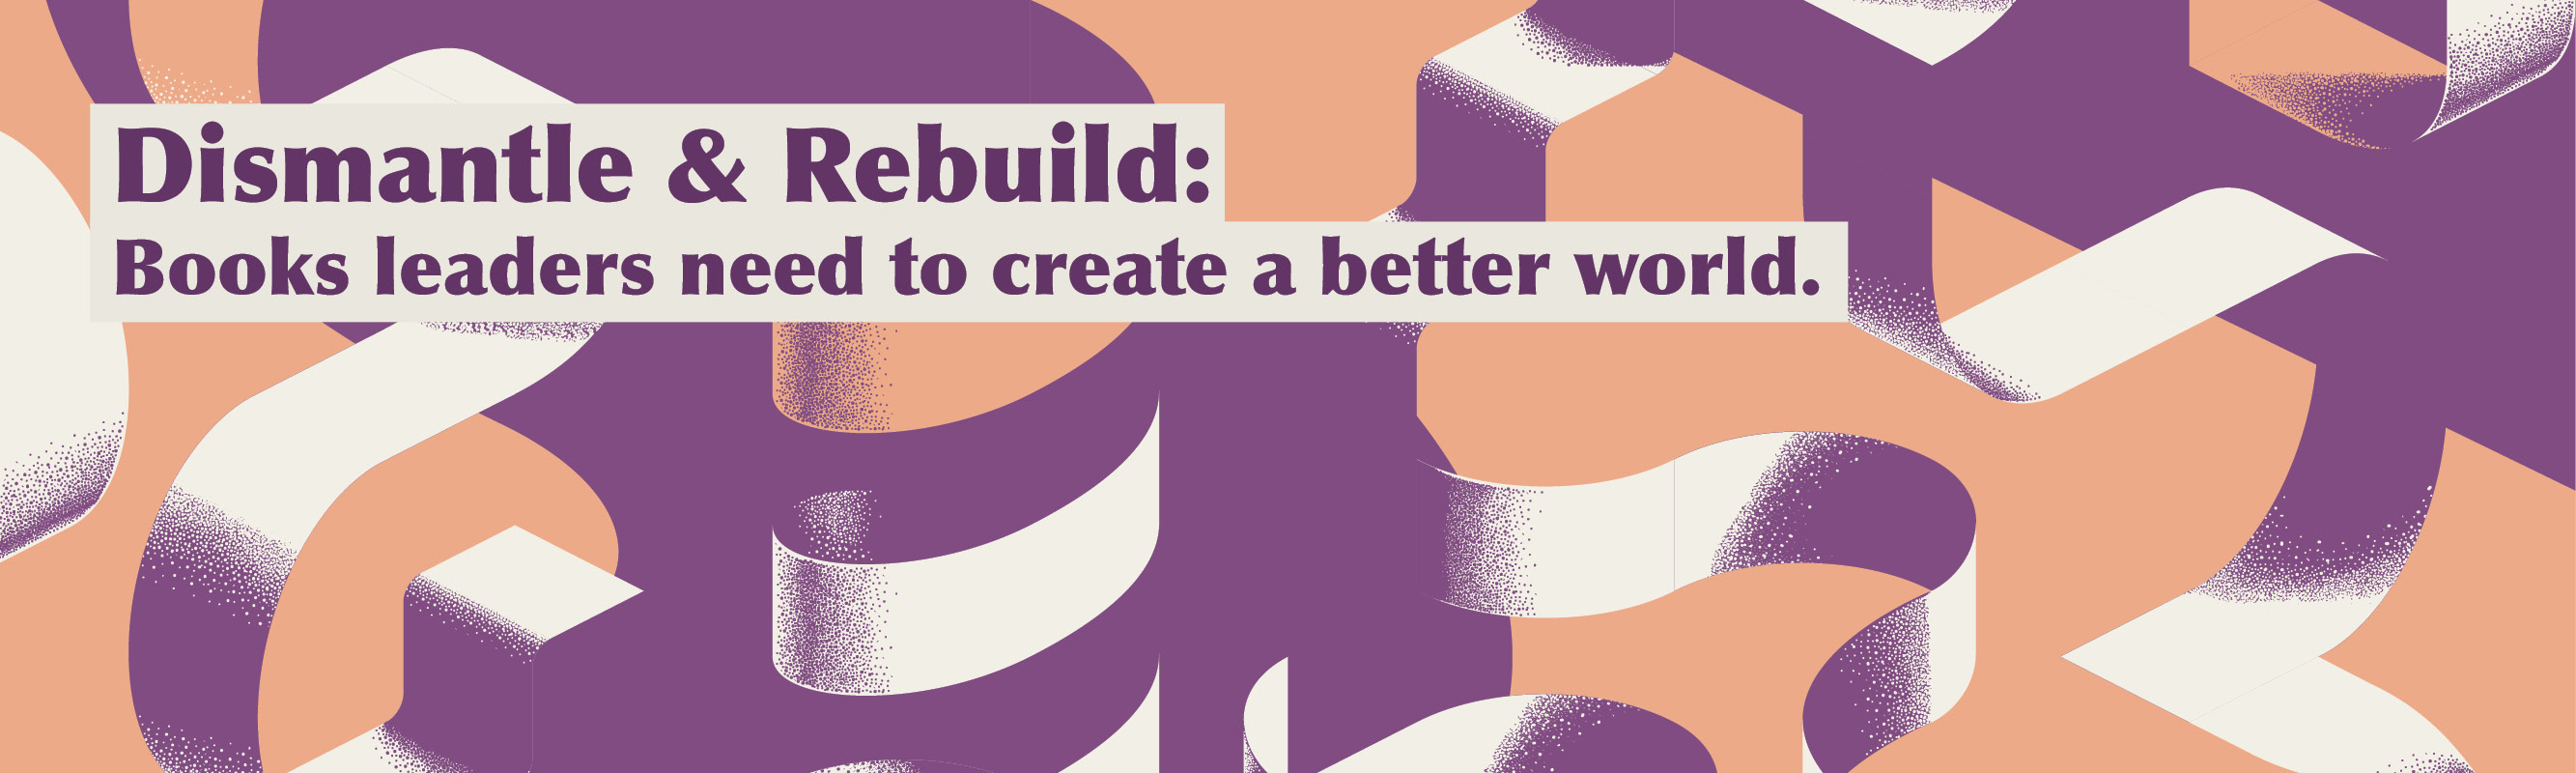 Dismantle & Rebuild: Books Leaders Need to Create a Better World